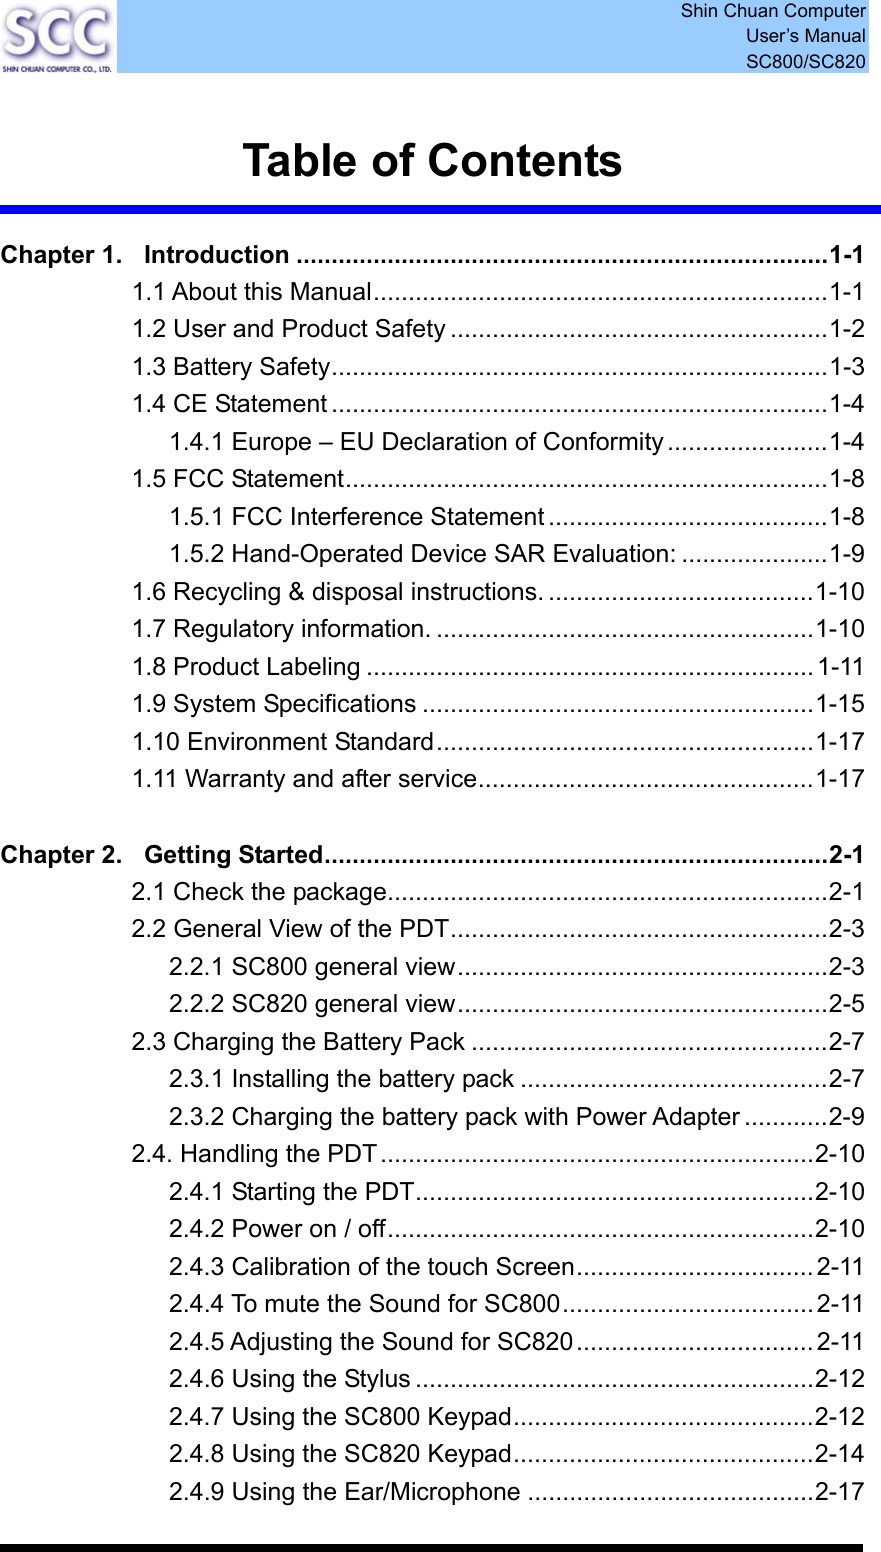  Shin Chuan Computer User’s Manual SC800/SC820   Table of Contents  Chapter 1. Introduction ............................................................................1-1 1.1 About this Manual.................................................................1-1 1.2 User and Product Safety ......................................................1-2 1.3 Battery Safety.......................................................................1-3 1.4 CE Statement .......................................................................1-4 1.4.1 Europe – EU Declaration of Conformity.......................1-4 1.5 FCC Statement.....................................................................1-8 1.5.1 FCC Interference Statement ........................................1-8 1.5.2 Hand-Operated Device SAR Evaluation: .....................1-9 1.6 Recycling &amp; disposal instructions. ......................................1-10 1.7 Regulatory information. ......................................................1-10 1.8 Product Labeling ................................................................1-11 1.9 System Specifications ........................................................1-15 1.10 Environment Standard......................................................1-17 1.11 Warranty and after service................................................1-17  Chapter 2. Getting Started........................................................................2-1 2.1 Check the package...............................................................2-1 2.2 General View of the PDT......................................................2-3 2.2.1 SC800 general view.....................................................2-3 2.2.2 SC820 general view.....................................................2-5 2.3 Charging the Battery Pack ...................................................2-7 2.3.1 Installing the battery pack ............................................2-7 2.3.2 Charging the battery pack with Power Adapter ............2-9 2.4. Handling the PDT..............................................................2-10 2.4.1 Starting the PDT.........................................................2-10 2.4.2 Power on / off.............................................................2-10 2.4.3 Calibration of the touch Screen..................................2-11 2.4.4 To mute the Sound for SC800....................................2-11 2.4.5 Adjusting the Sound for SC820..................................2-11 2.4.6 Using the Stylus .........................................................2-12 2.4.7 Using the SC800 Keypad...........................................2-12 2.4.8 Using the SC820 Keypad...........................................2-14 2.4.9 Using the Ear/Microphone .........................................2-17 